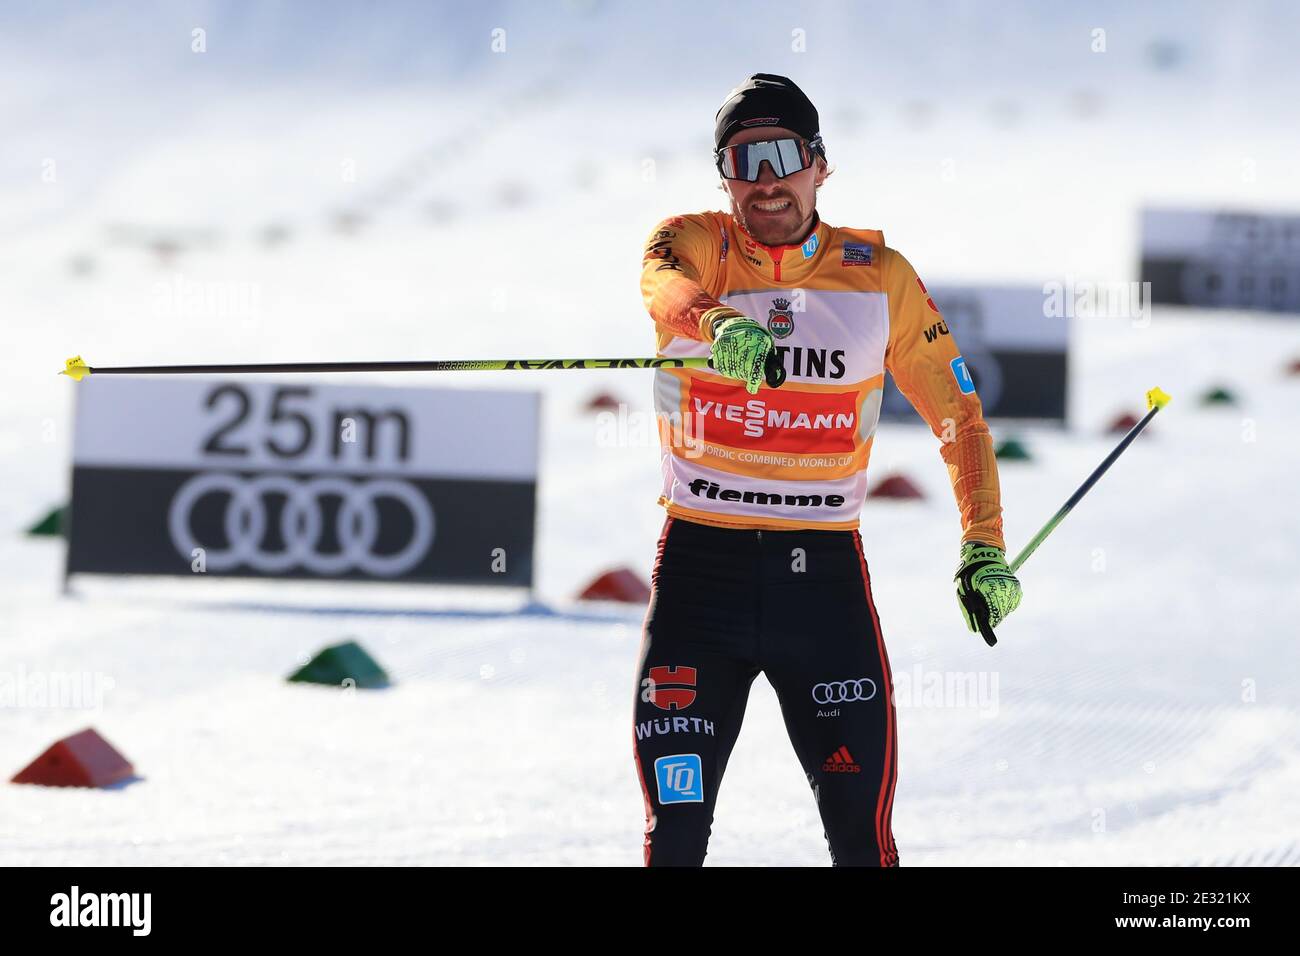 Val Di Fiemme, Trentino, Italien. 16. Januar 2021; Val Di Fiemme, Predazzo, Trentino, Italien; International Ski Federation Nordic Combined Team Sprint World Cup, Fabian Riessle (GER) im Ziel Credit: Action Plus Sports Images/Alamy Live News Stockfoto